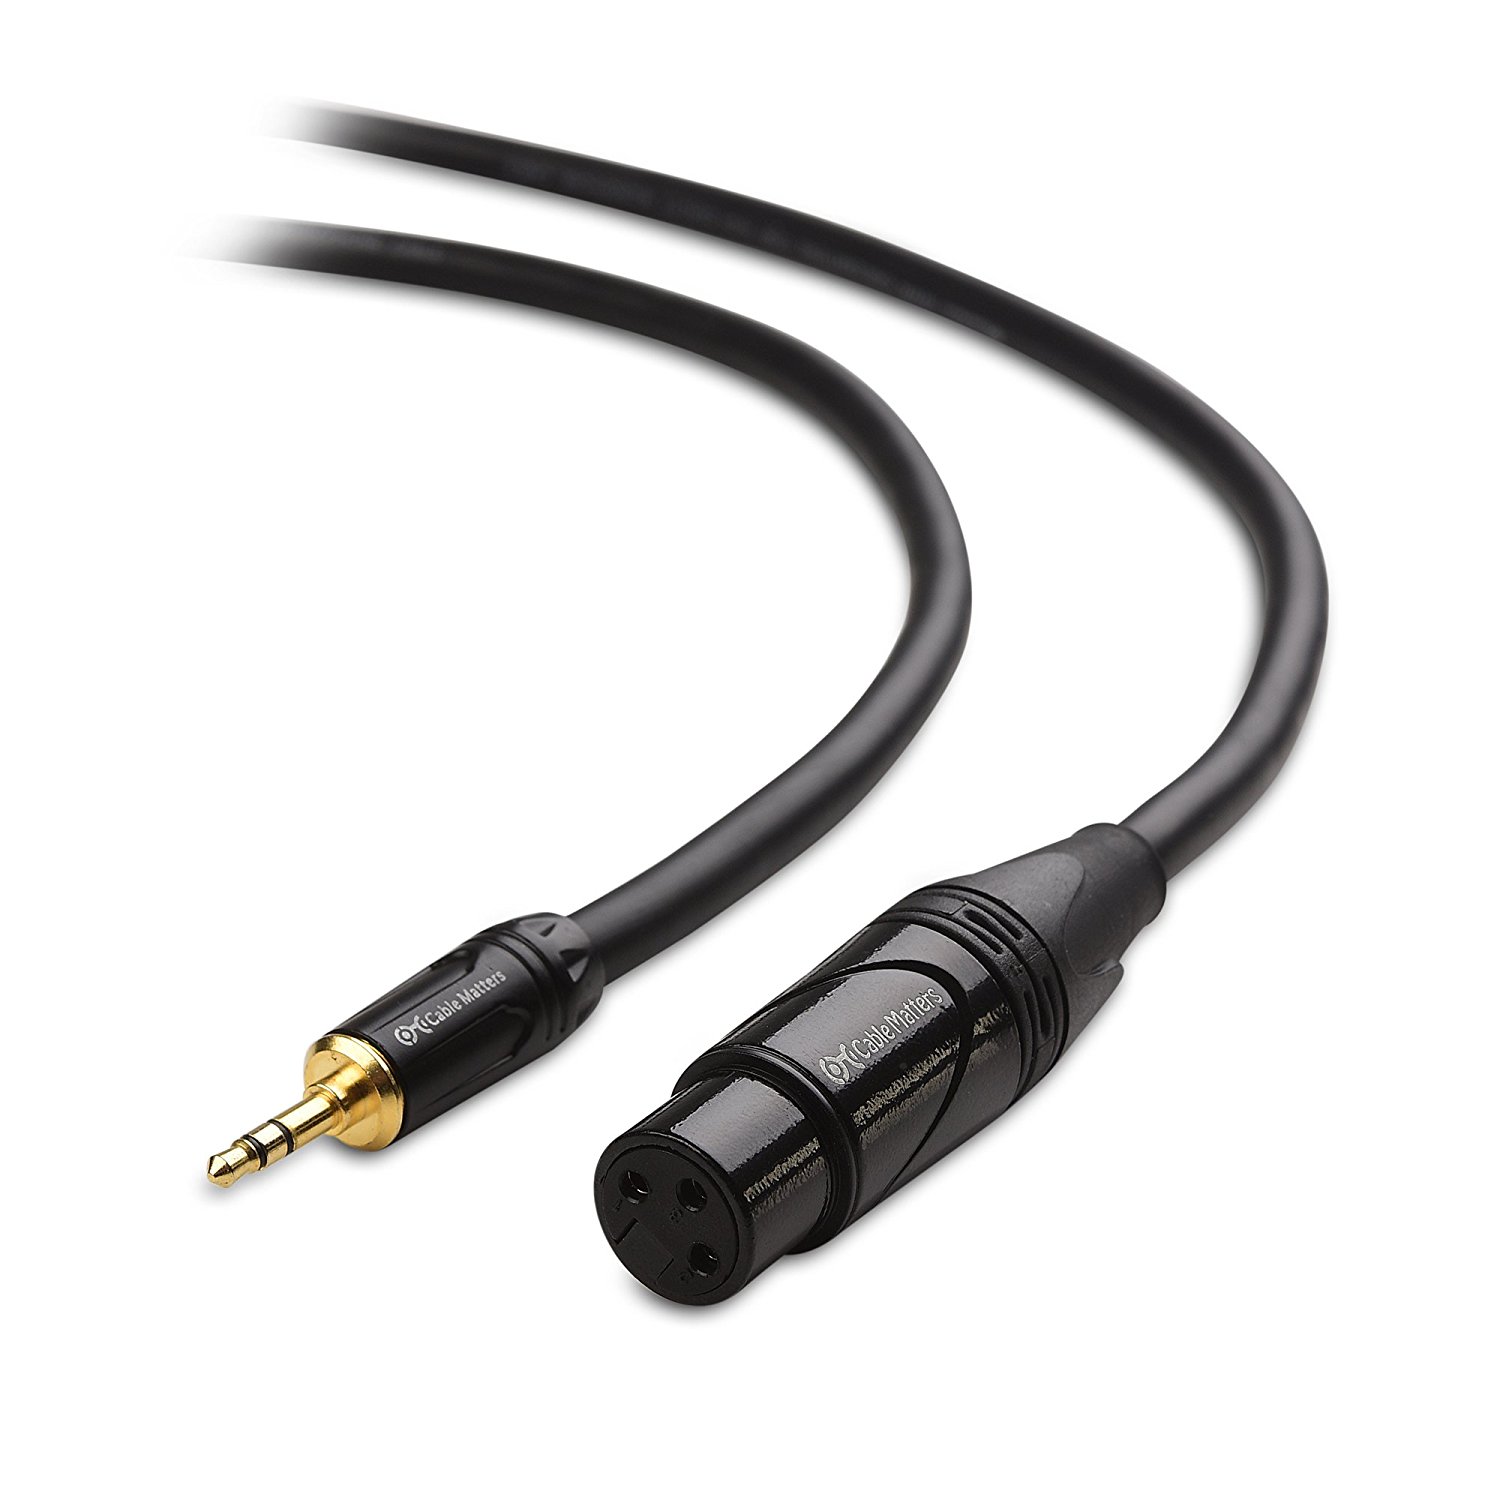 Cable Matters (1/8 Inch) 3.5mm to XLR Cable (XLR to 3.5mm Cable) Male to Female 25 Feet - image 1 of 3